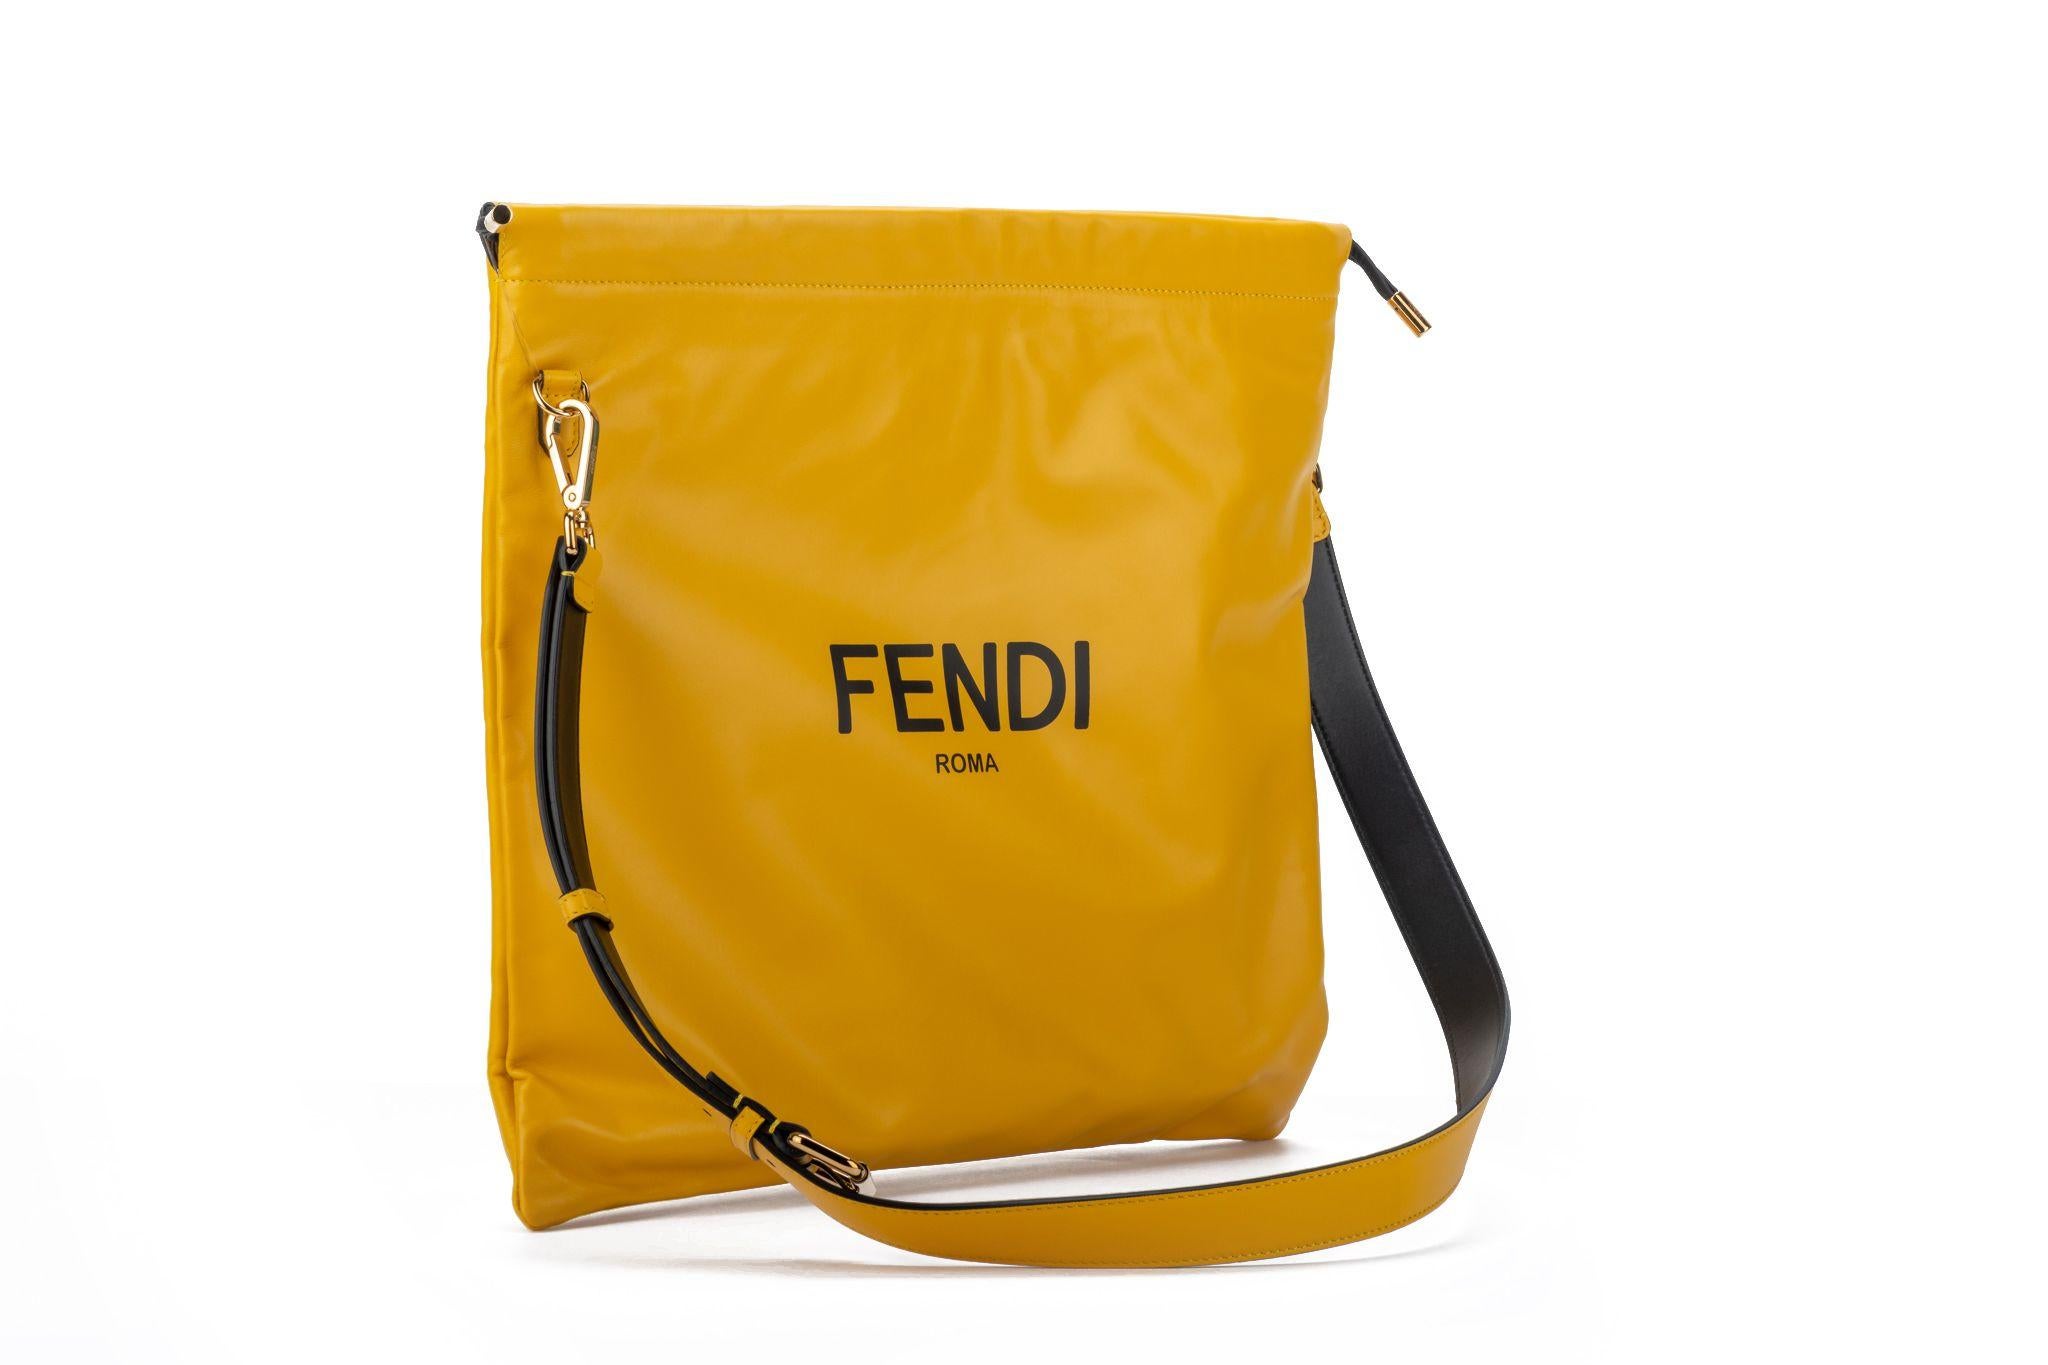 Fendi new large yellow lambskin cross body bag. 20” adjustable shoulder strap. Black details and hardware in gold . Booklet and original dustcover.
